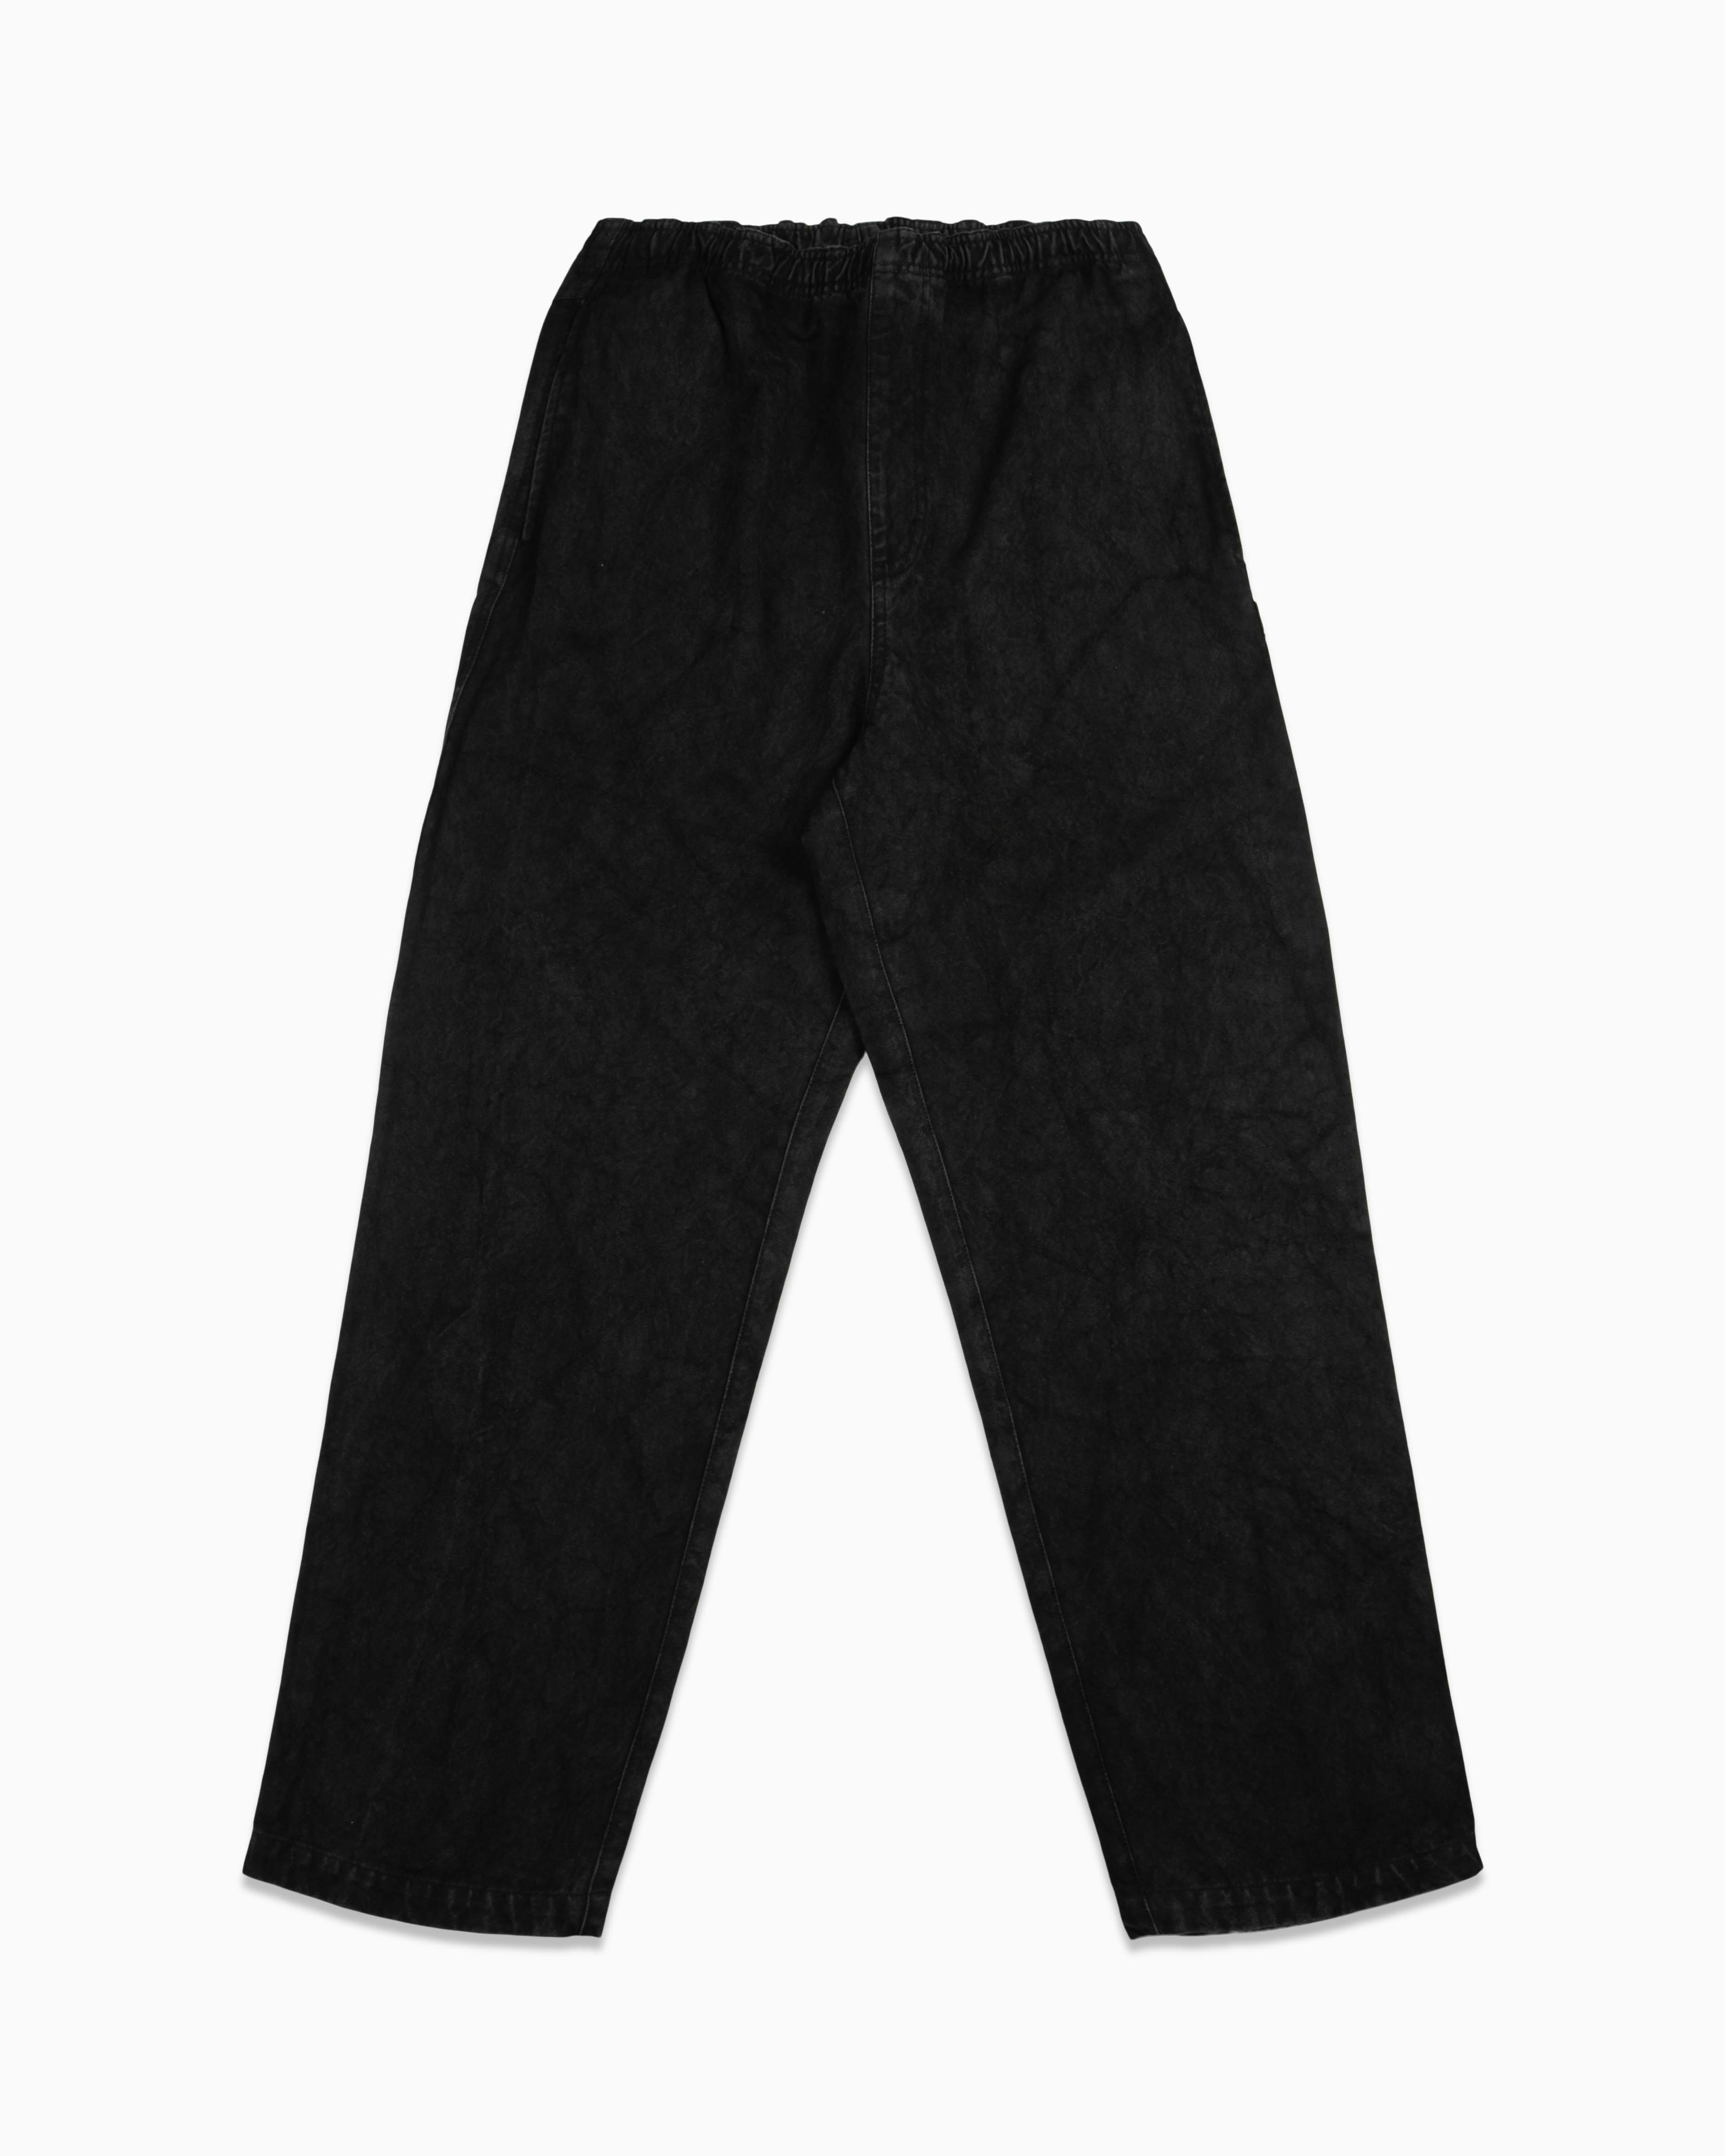 Washed Canvas Beach Pant Stussy Bottoms Pants Black